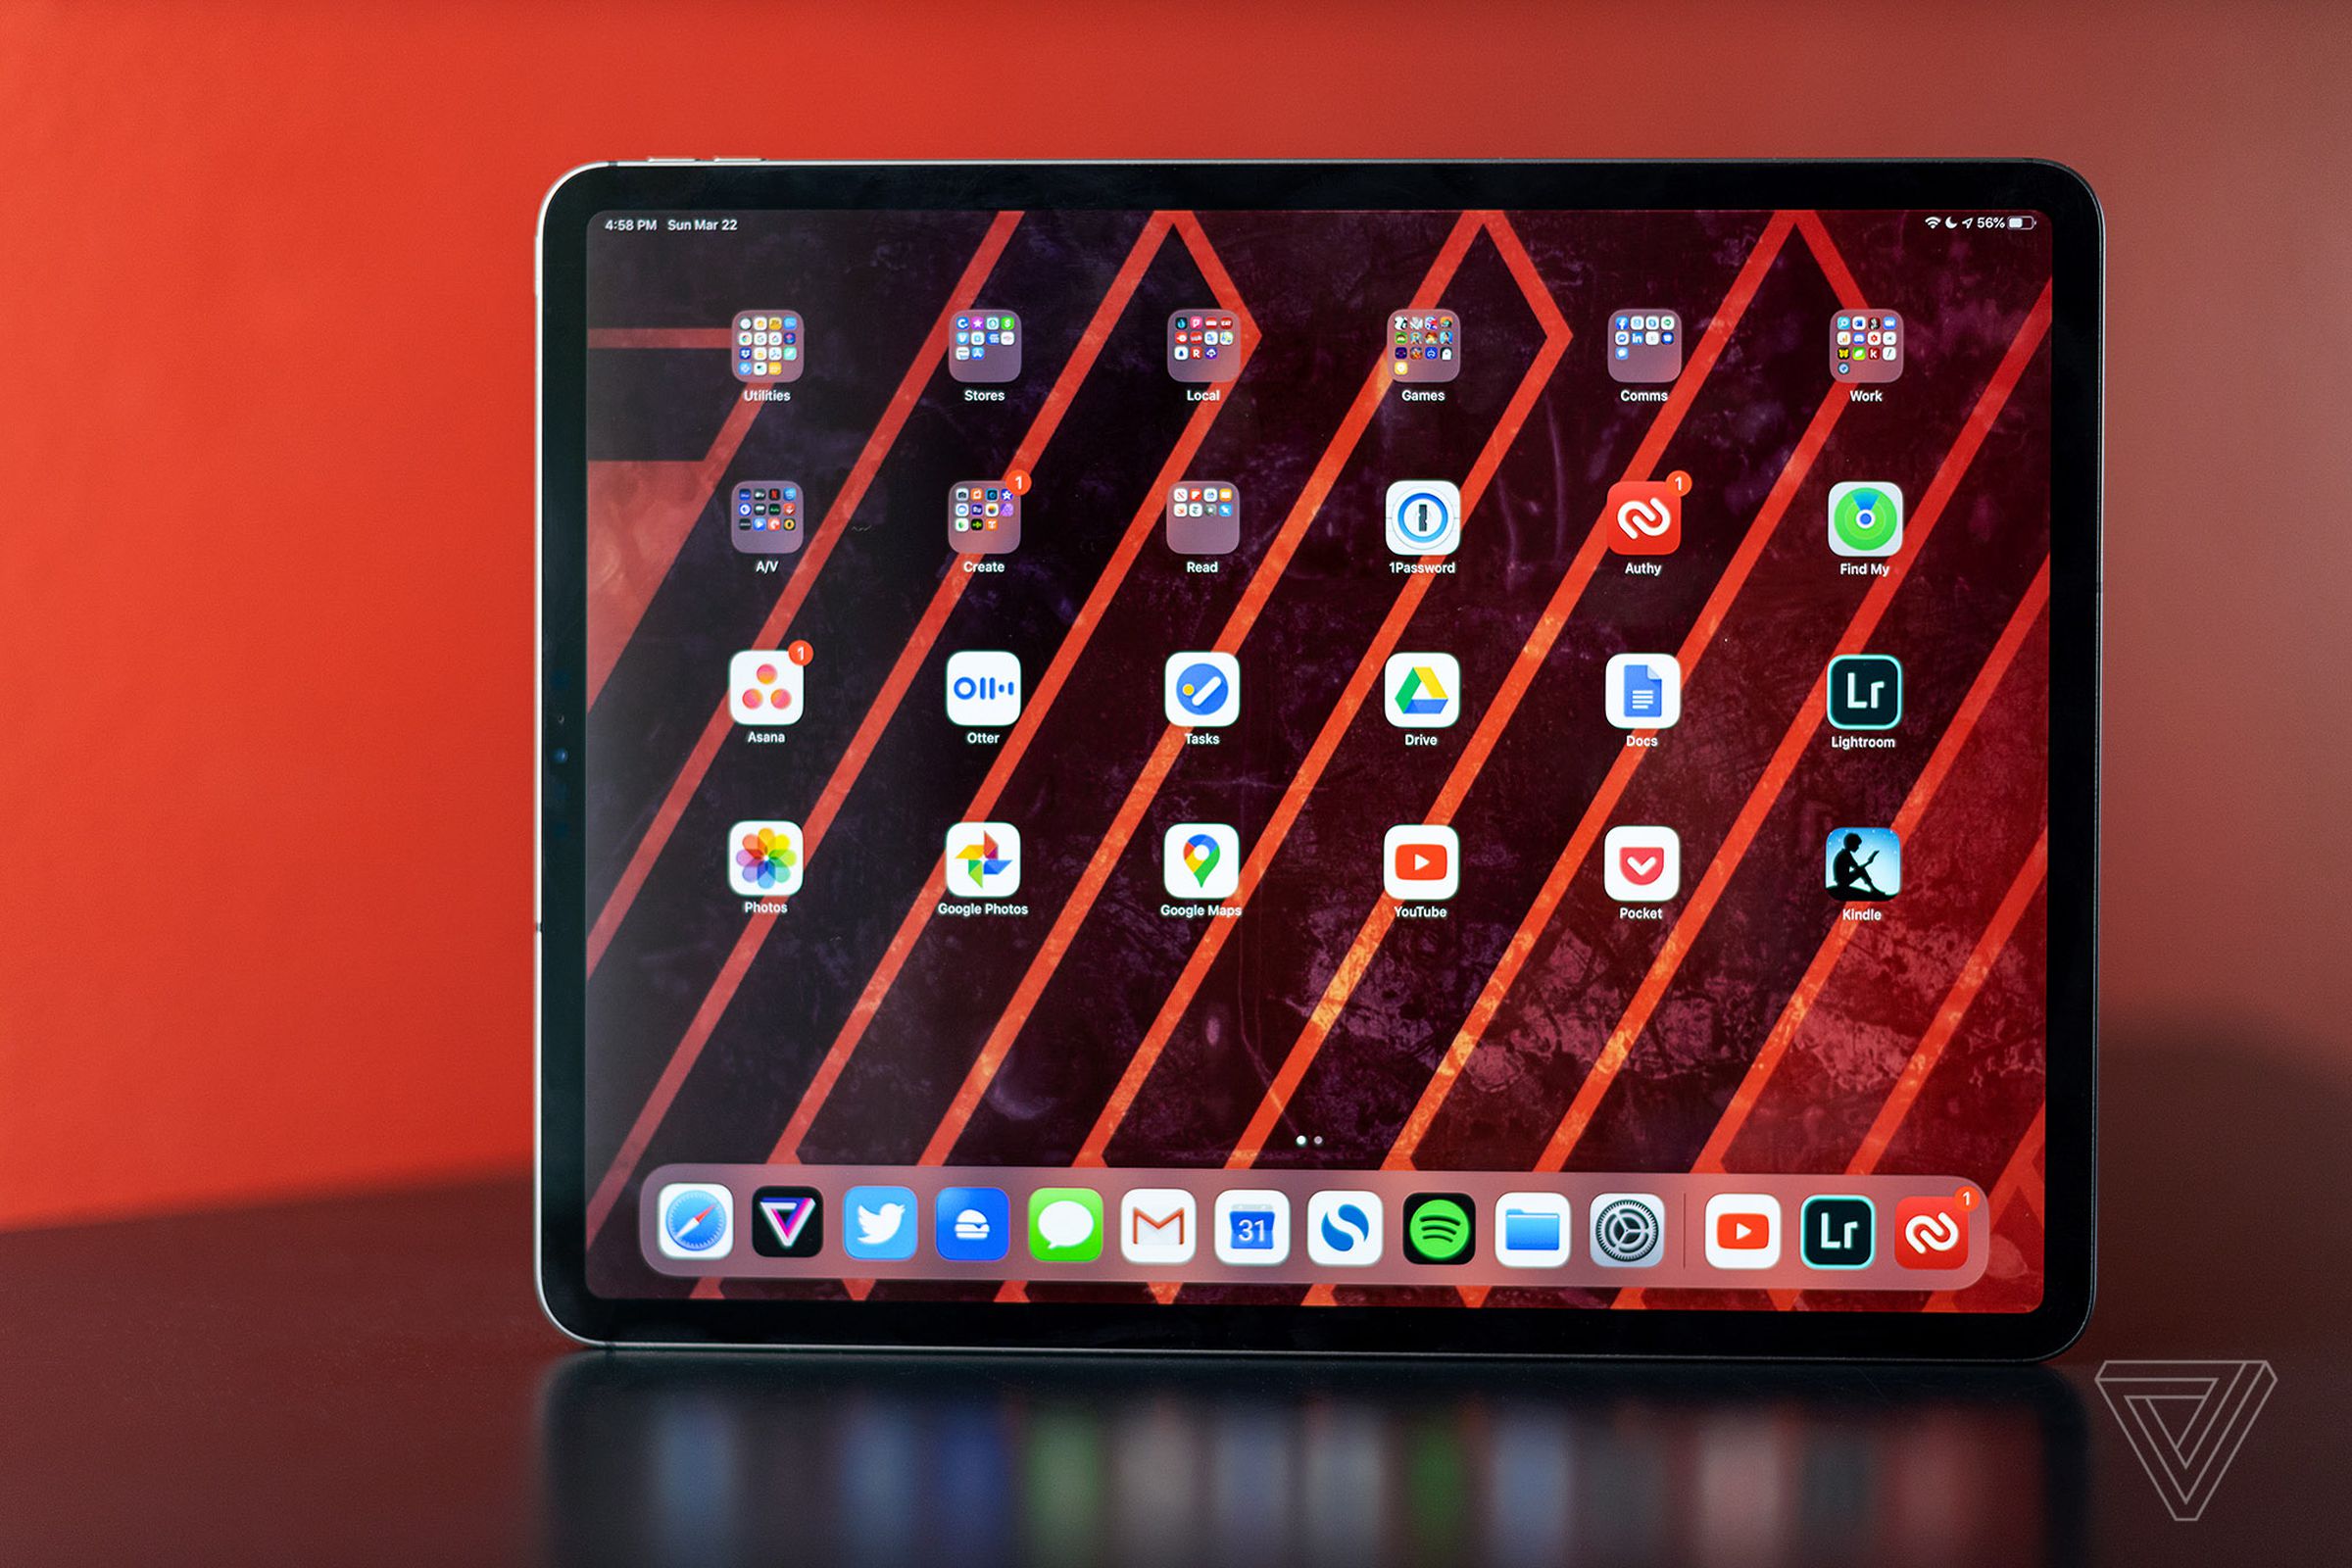 An iPad Pro set on a table in front of a red background